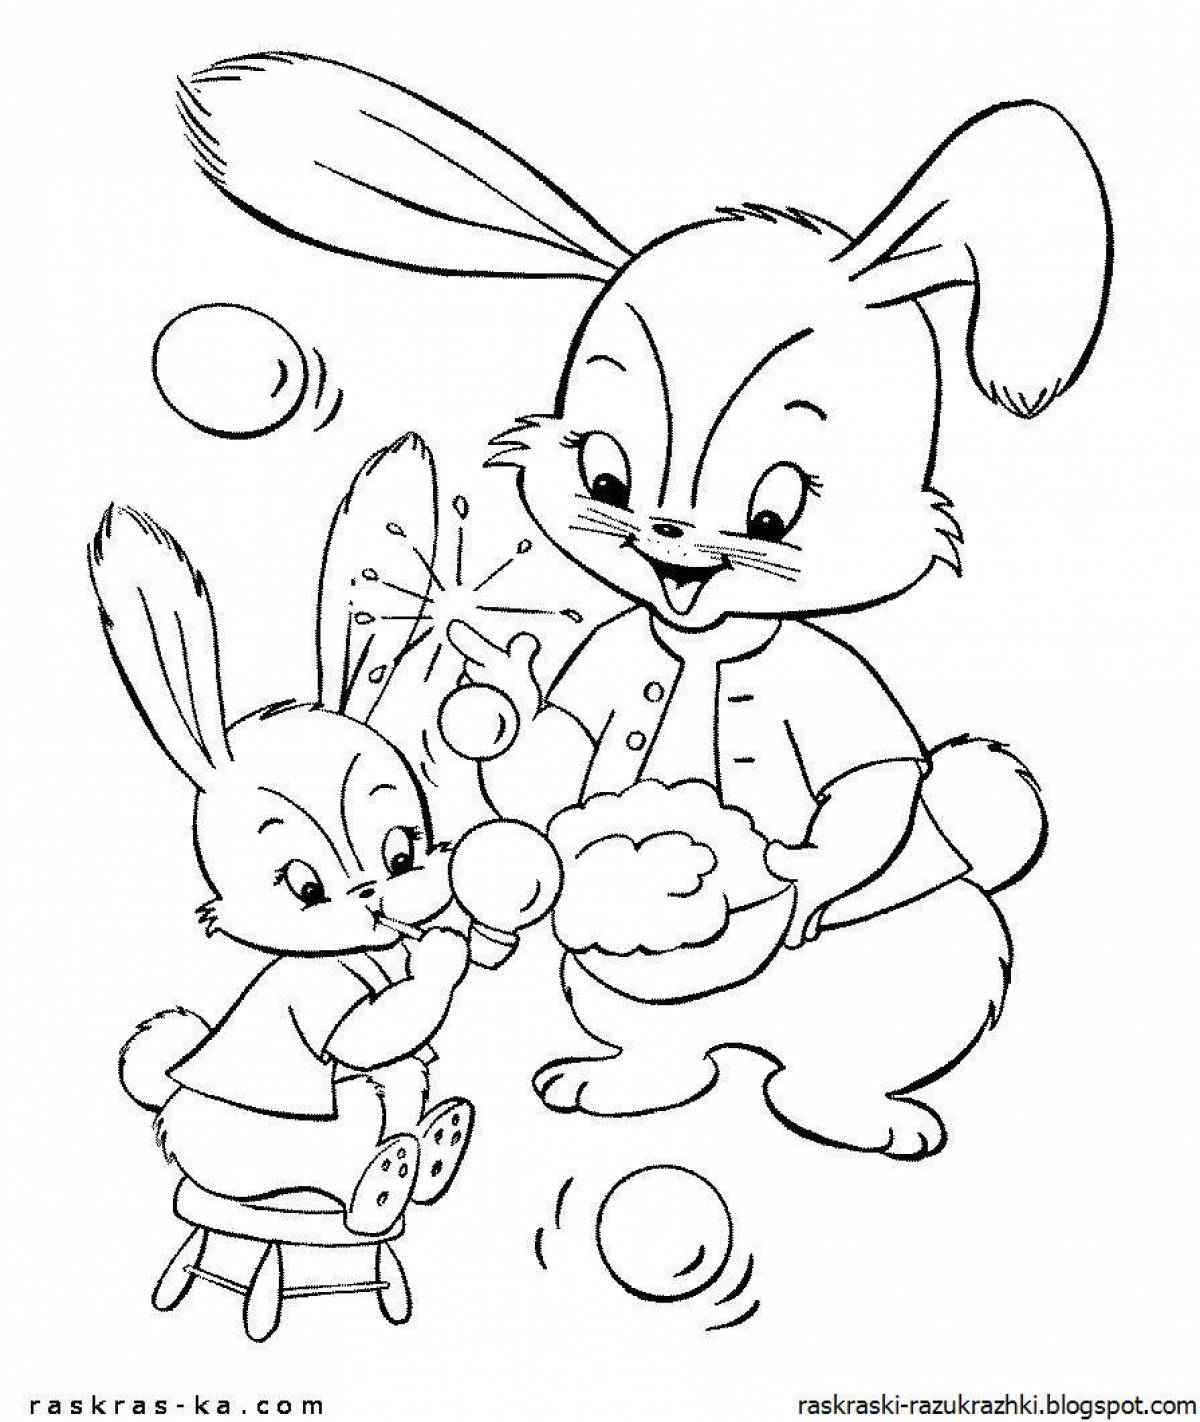 Witty bunny coloring book for kids